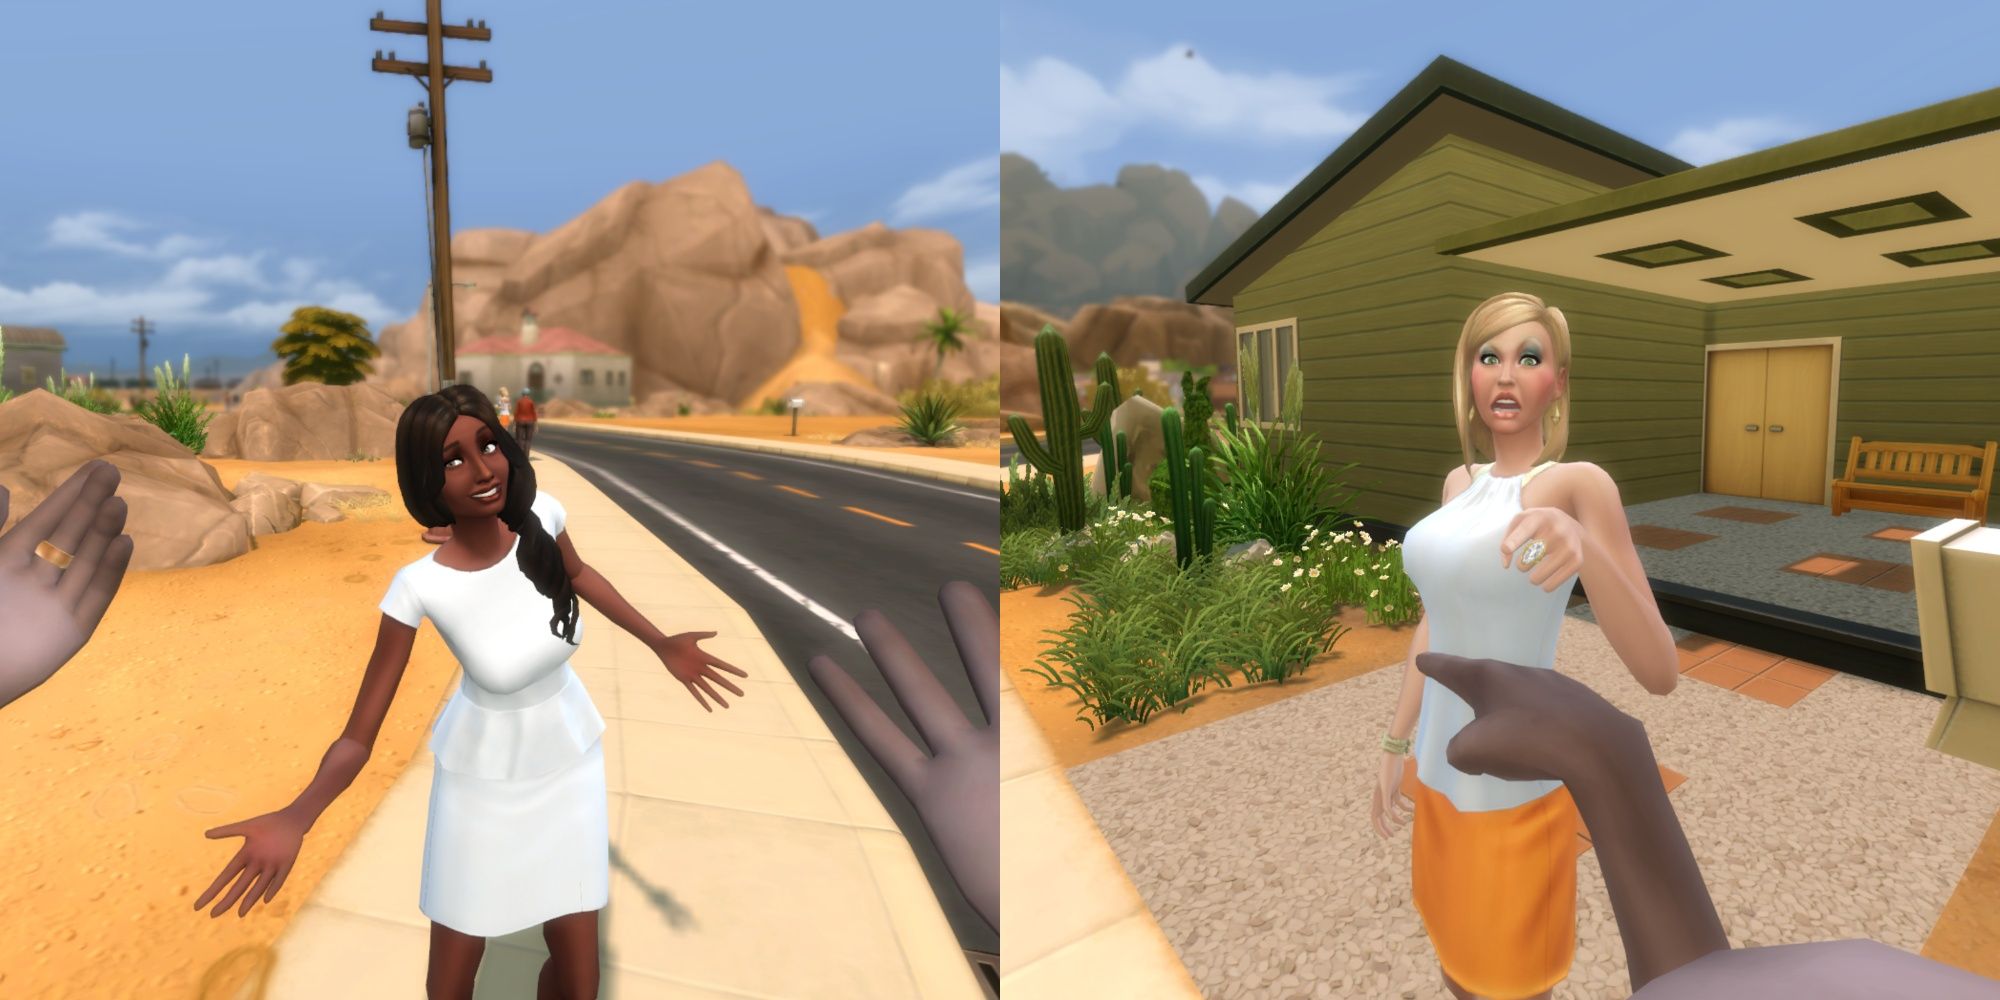 First Person Mode: Friendly Greeting (Left), Rude Greeting (Right)